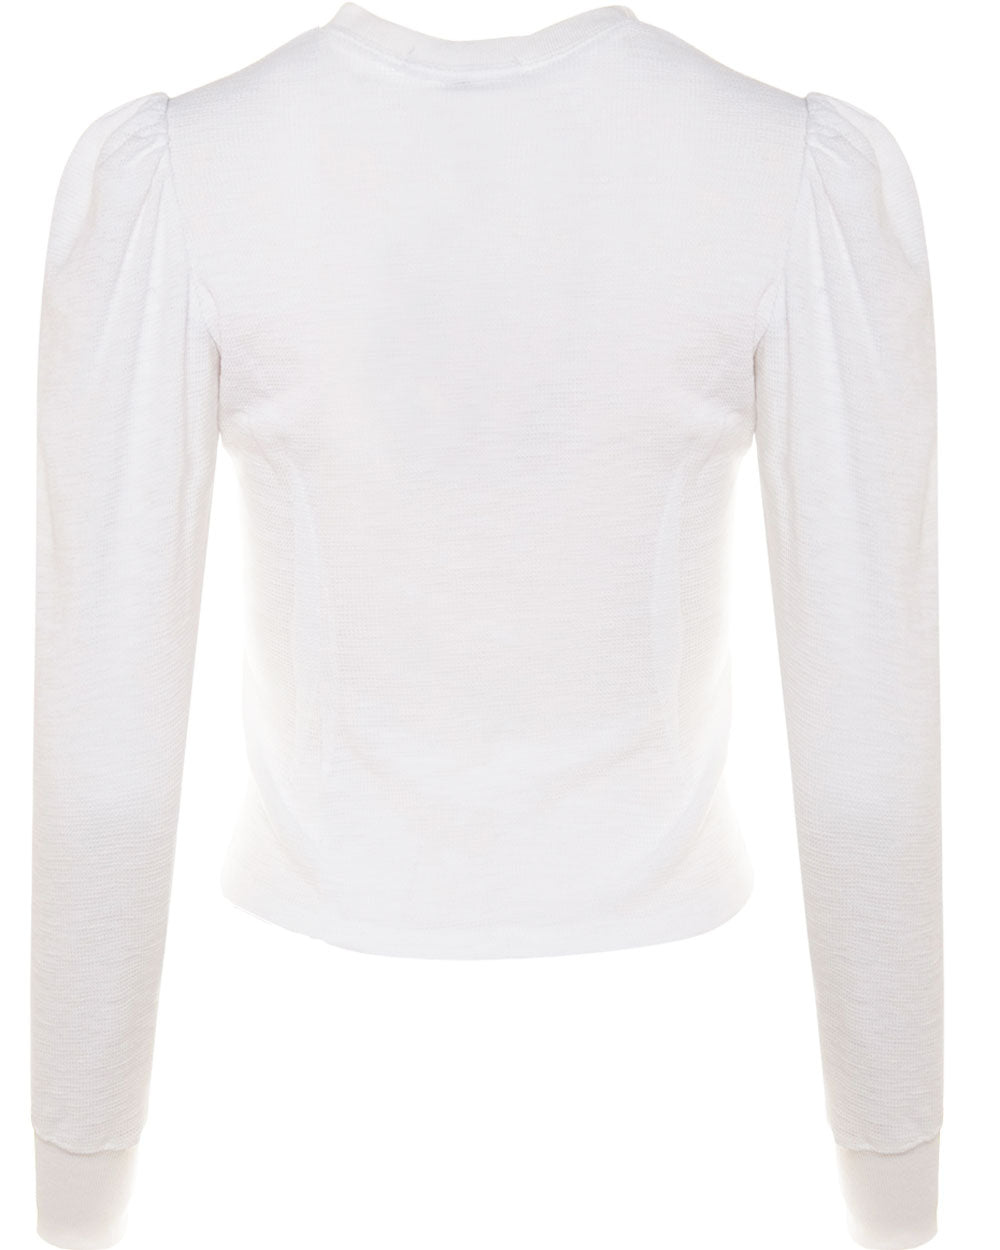 White Blair Waffle Knit Puff Sleeve Pullover